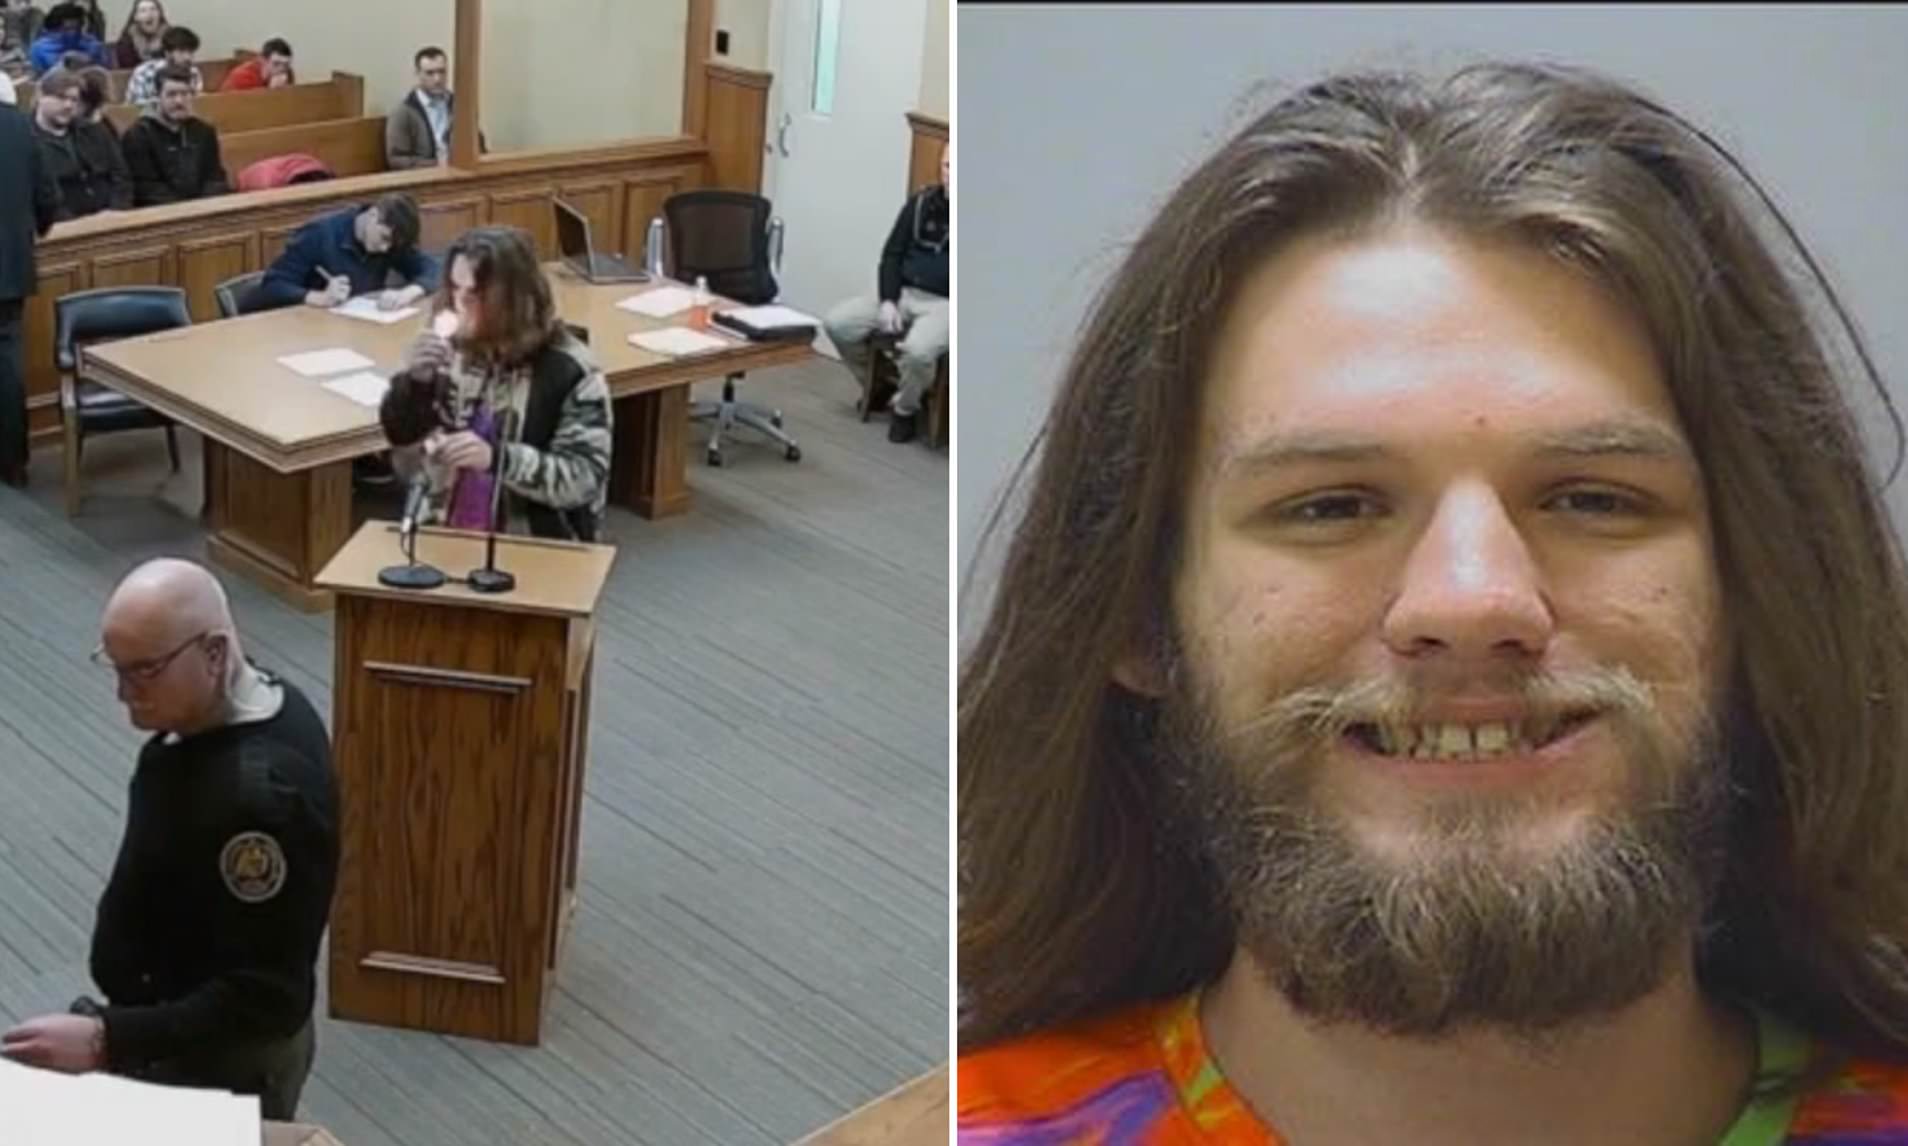 Tennessee Man Who Lit Up a Joint in Court Appearance Last Year Dies in Car Crash